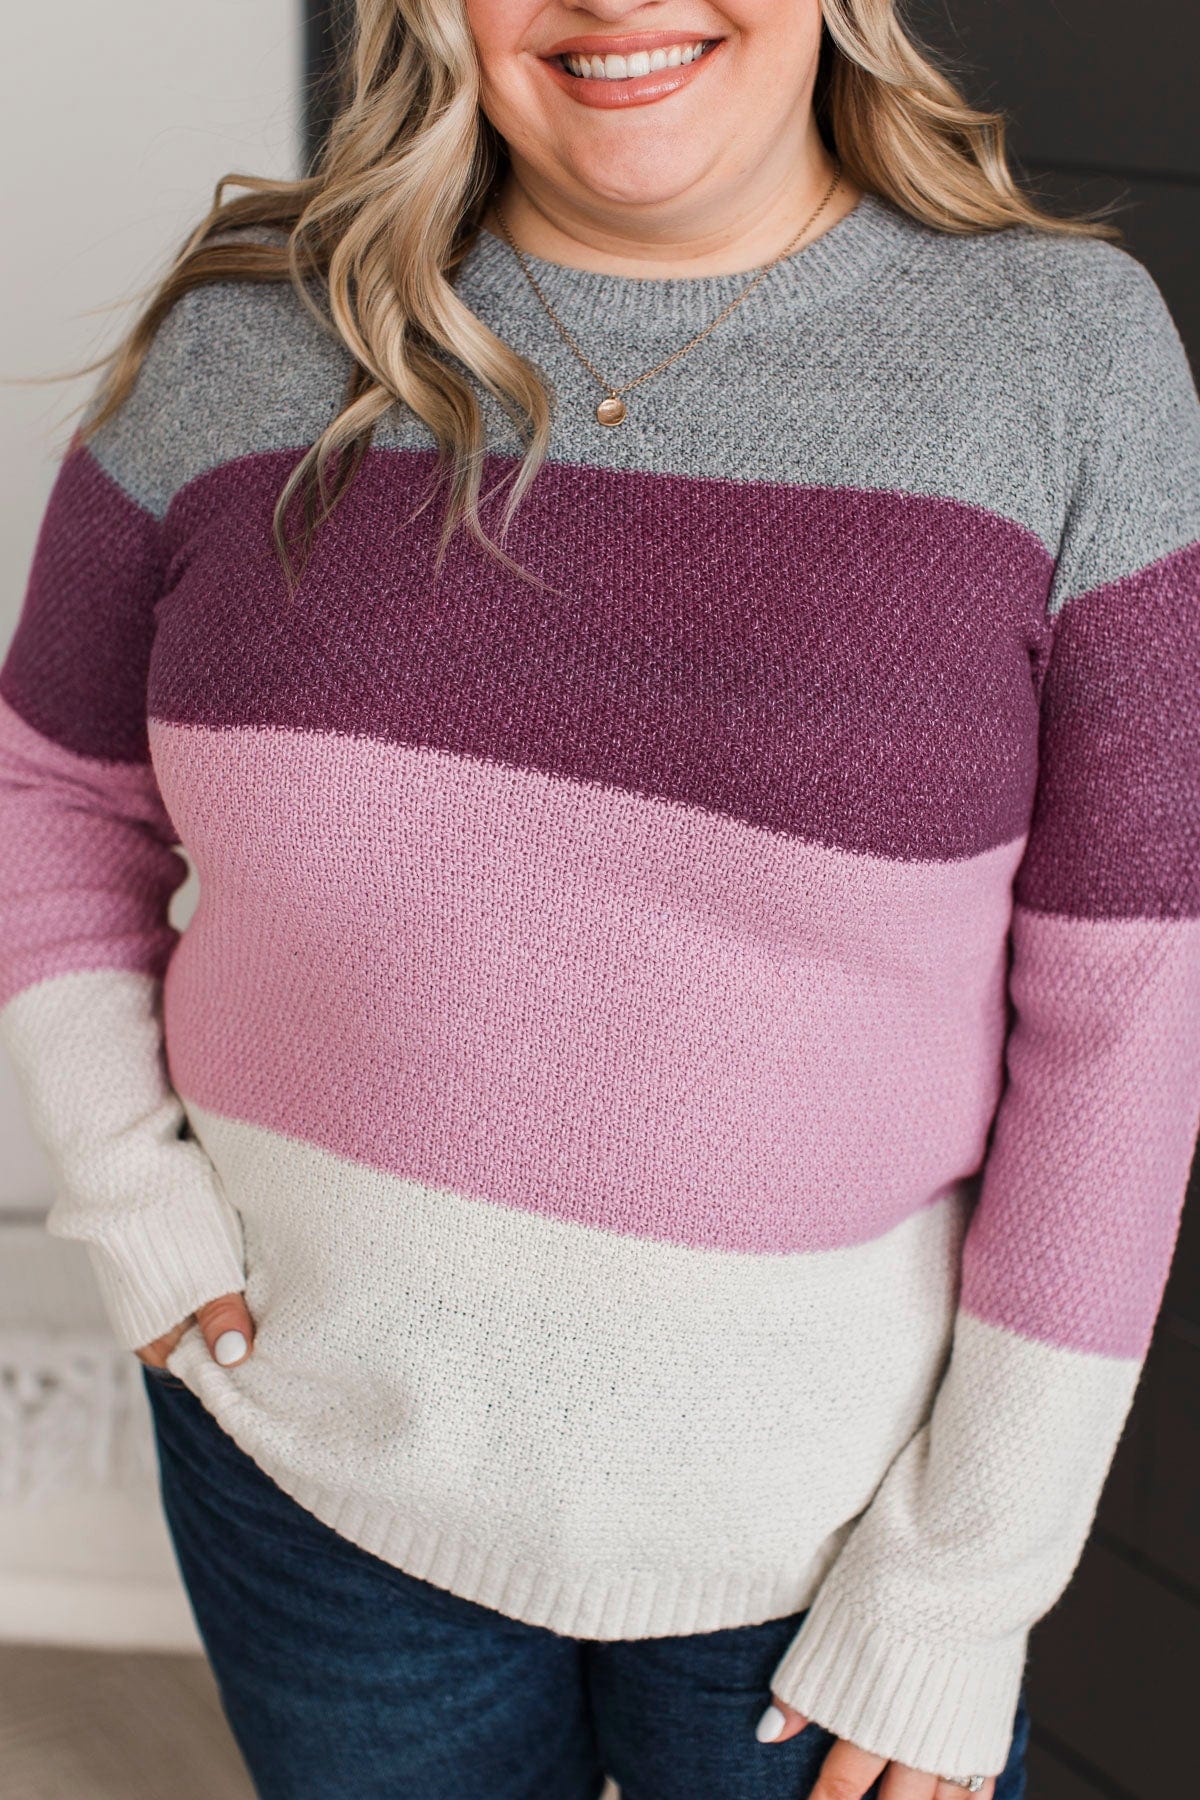 All About Spring Color Block Knit Sweater- Magenta & Mauve